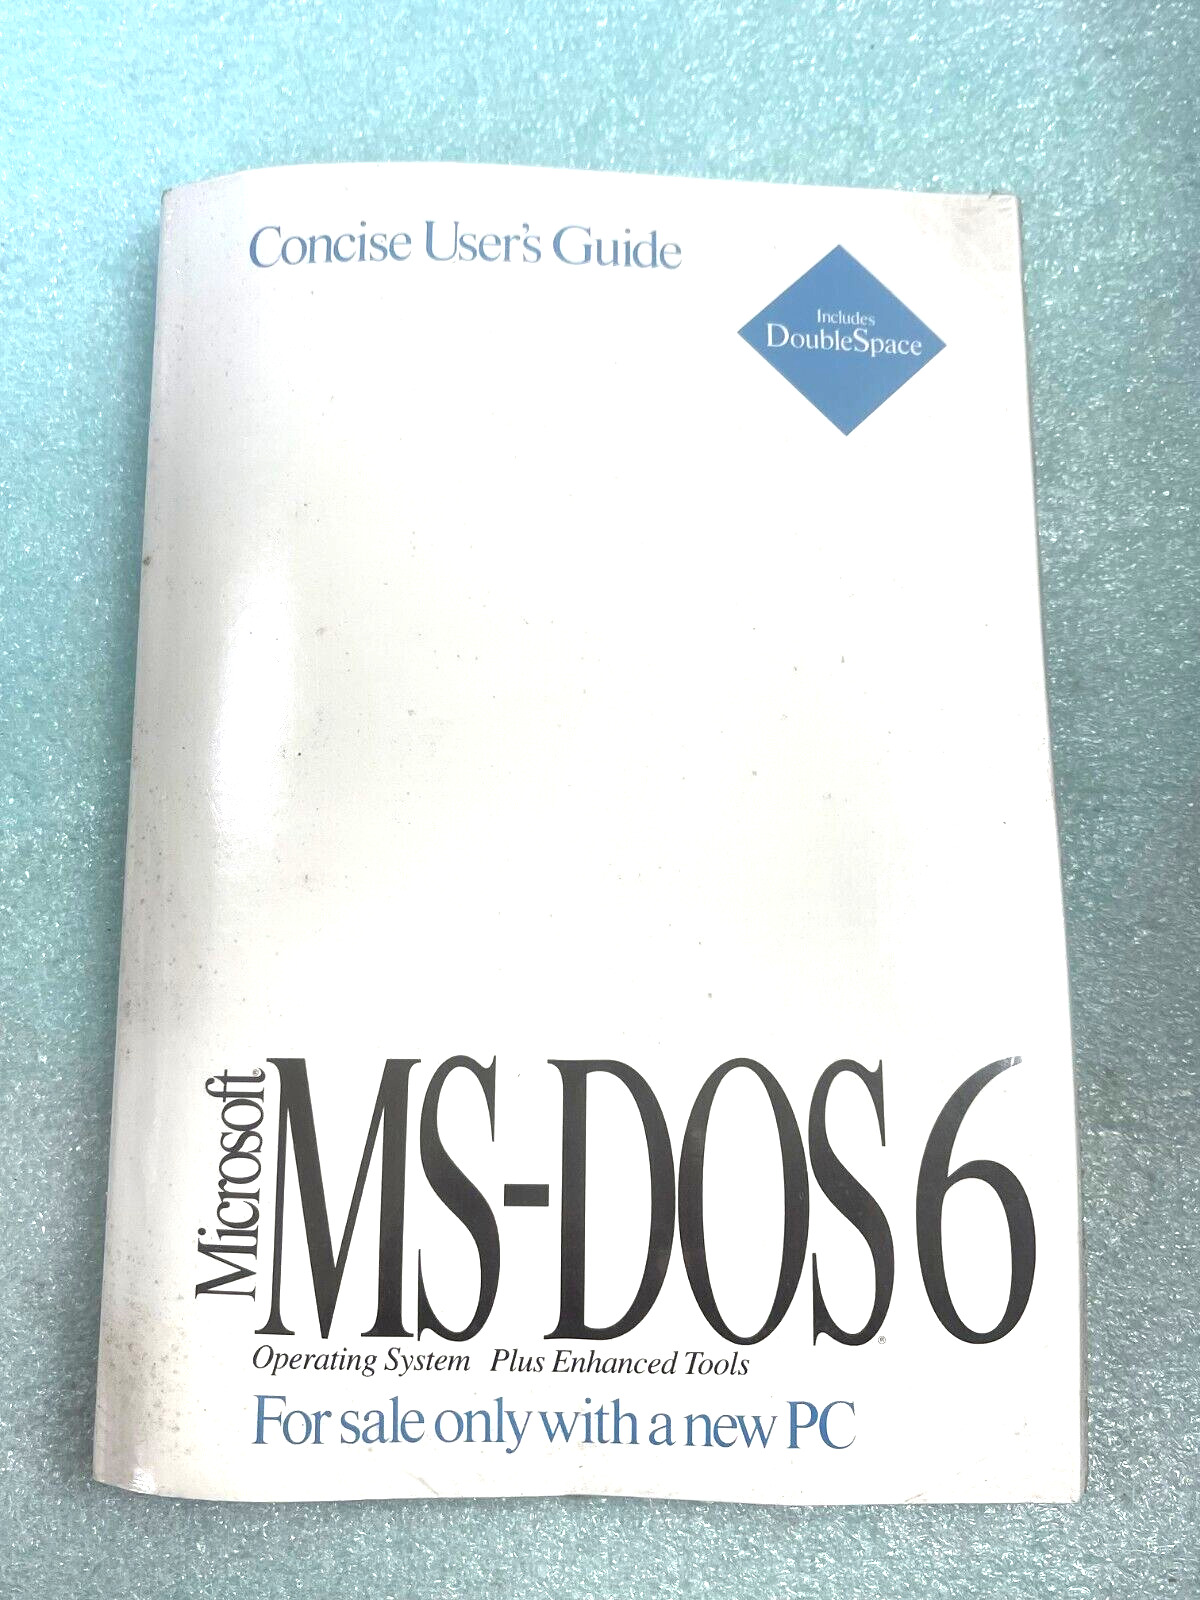 RARE VINTAGE NEW SEALED UNOPENED MICROSOFT MS-DOS 6 WITH COA 1.44MB DISC RM4-SW1